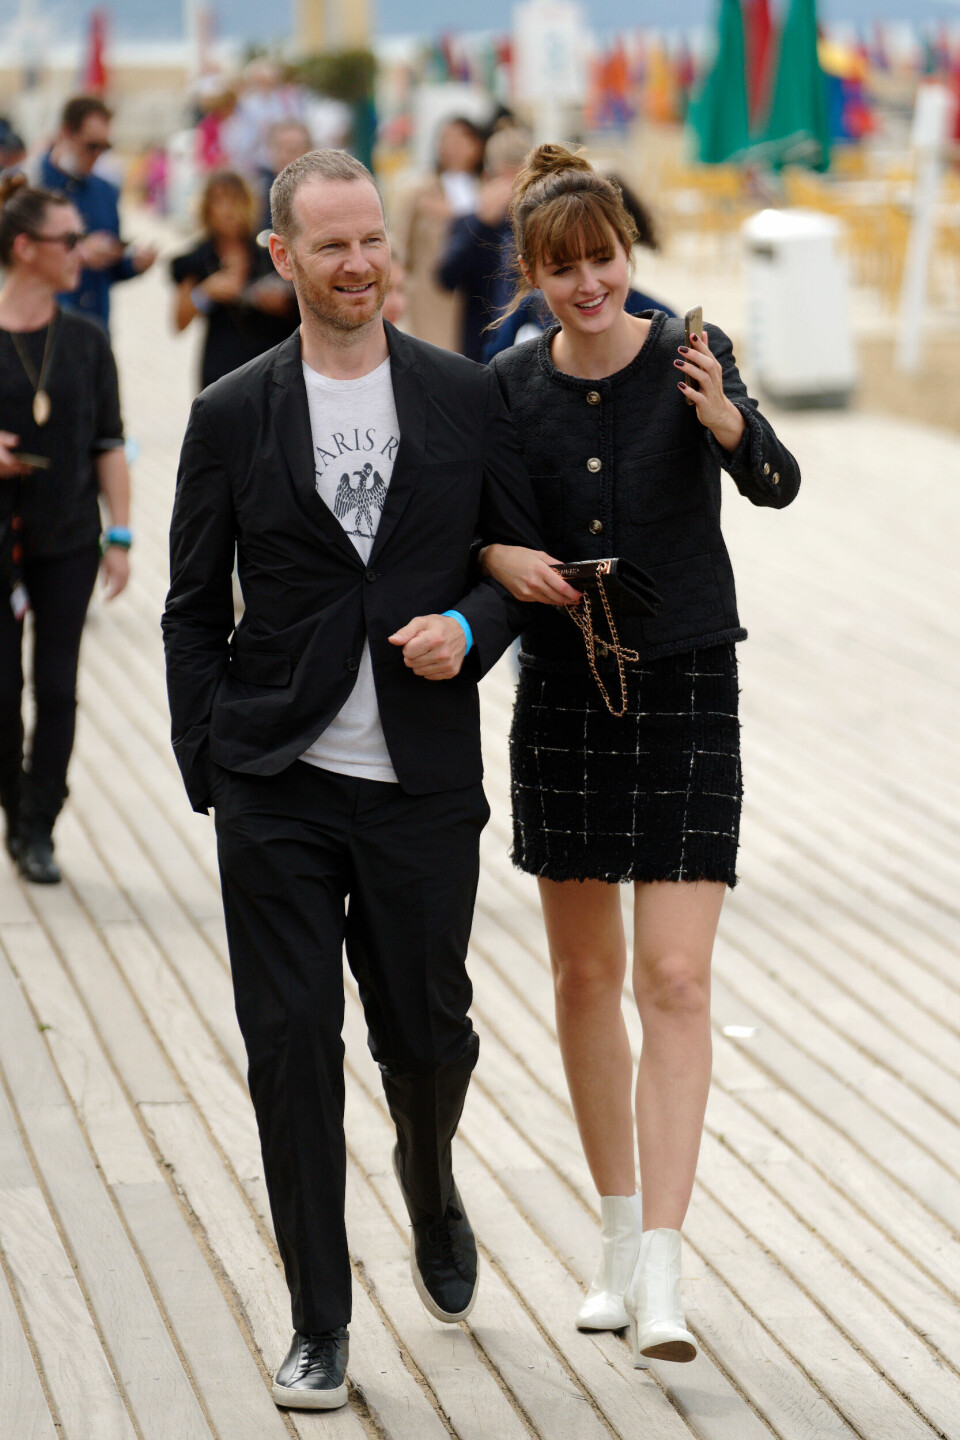 DEAUVILLE, FRANCE - SEPTEMBER 10: Norway's actress Renate Reinsve and Norway's film director Joachim Trier psoe on the beach after the screening of  the movie "Julie (En 12 Chapitres)" during the 47th Deauville American Film Festival on September 10, 2021 in Deauville, France. (Photo by Sylvain Lefevre/WireImage)